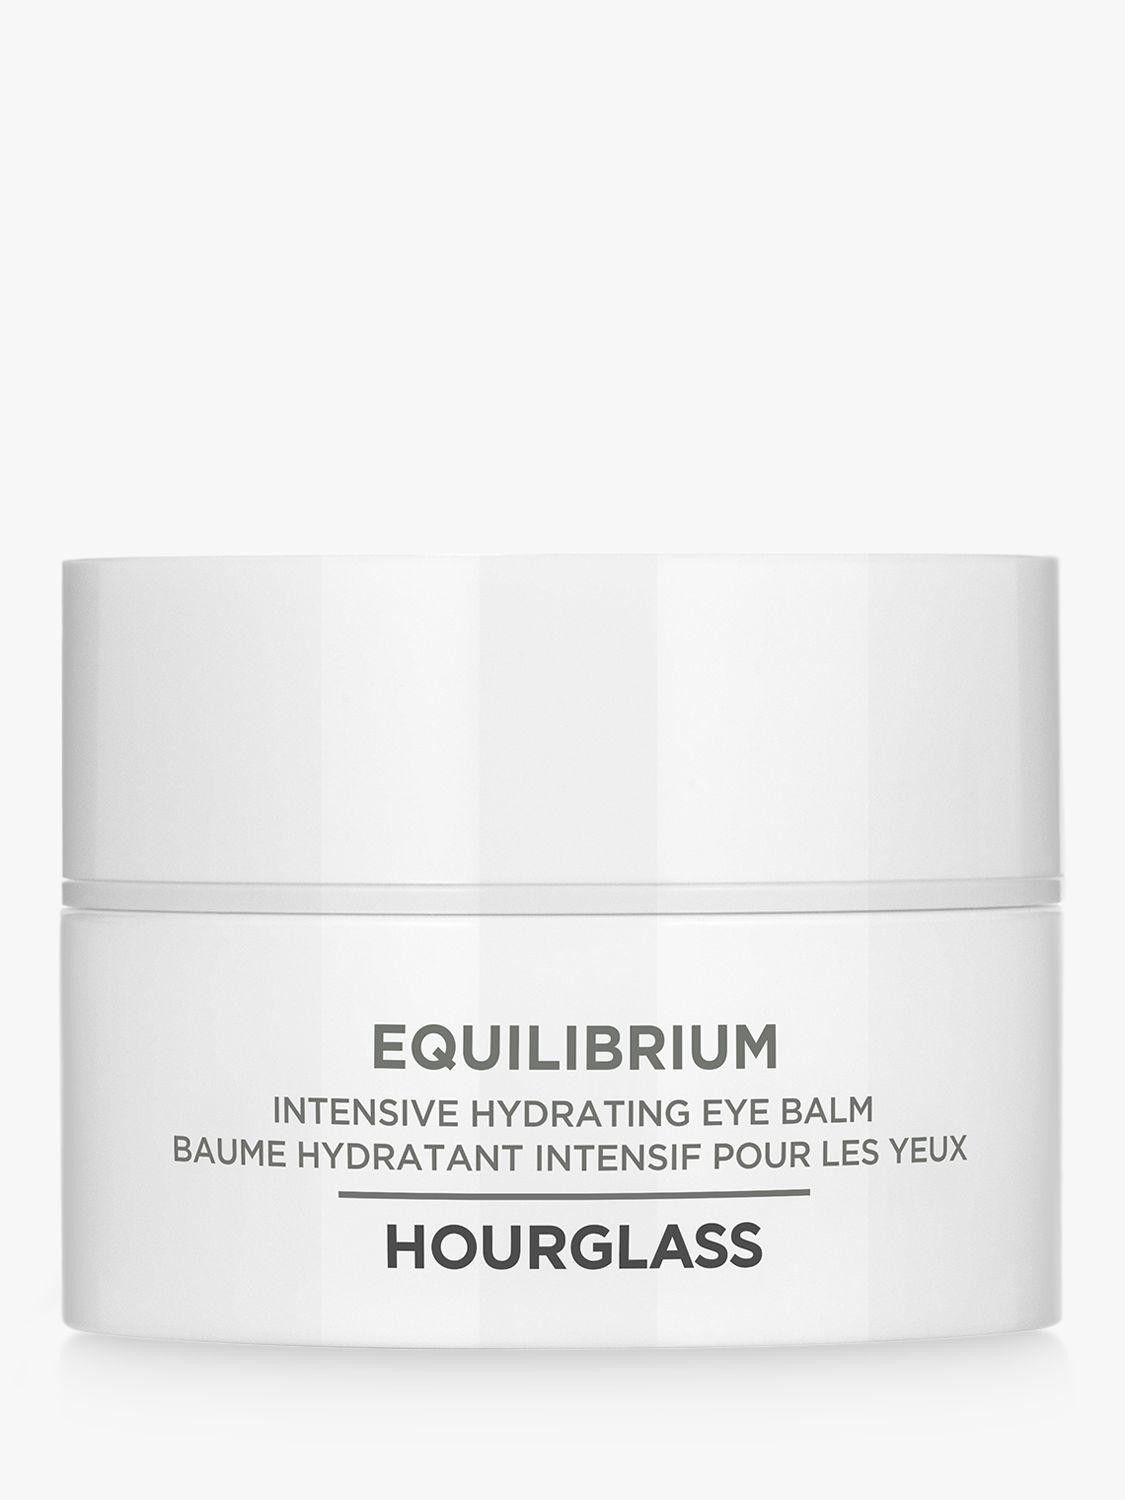 Hourglass Equilibrium Intensive Hydrating Eye Balm, 16.3g 1